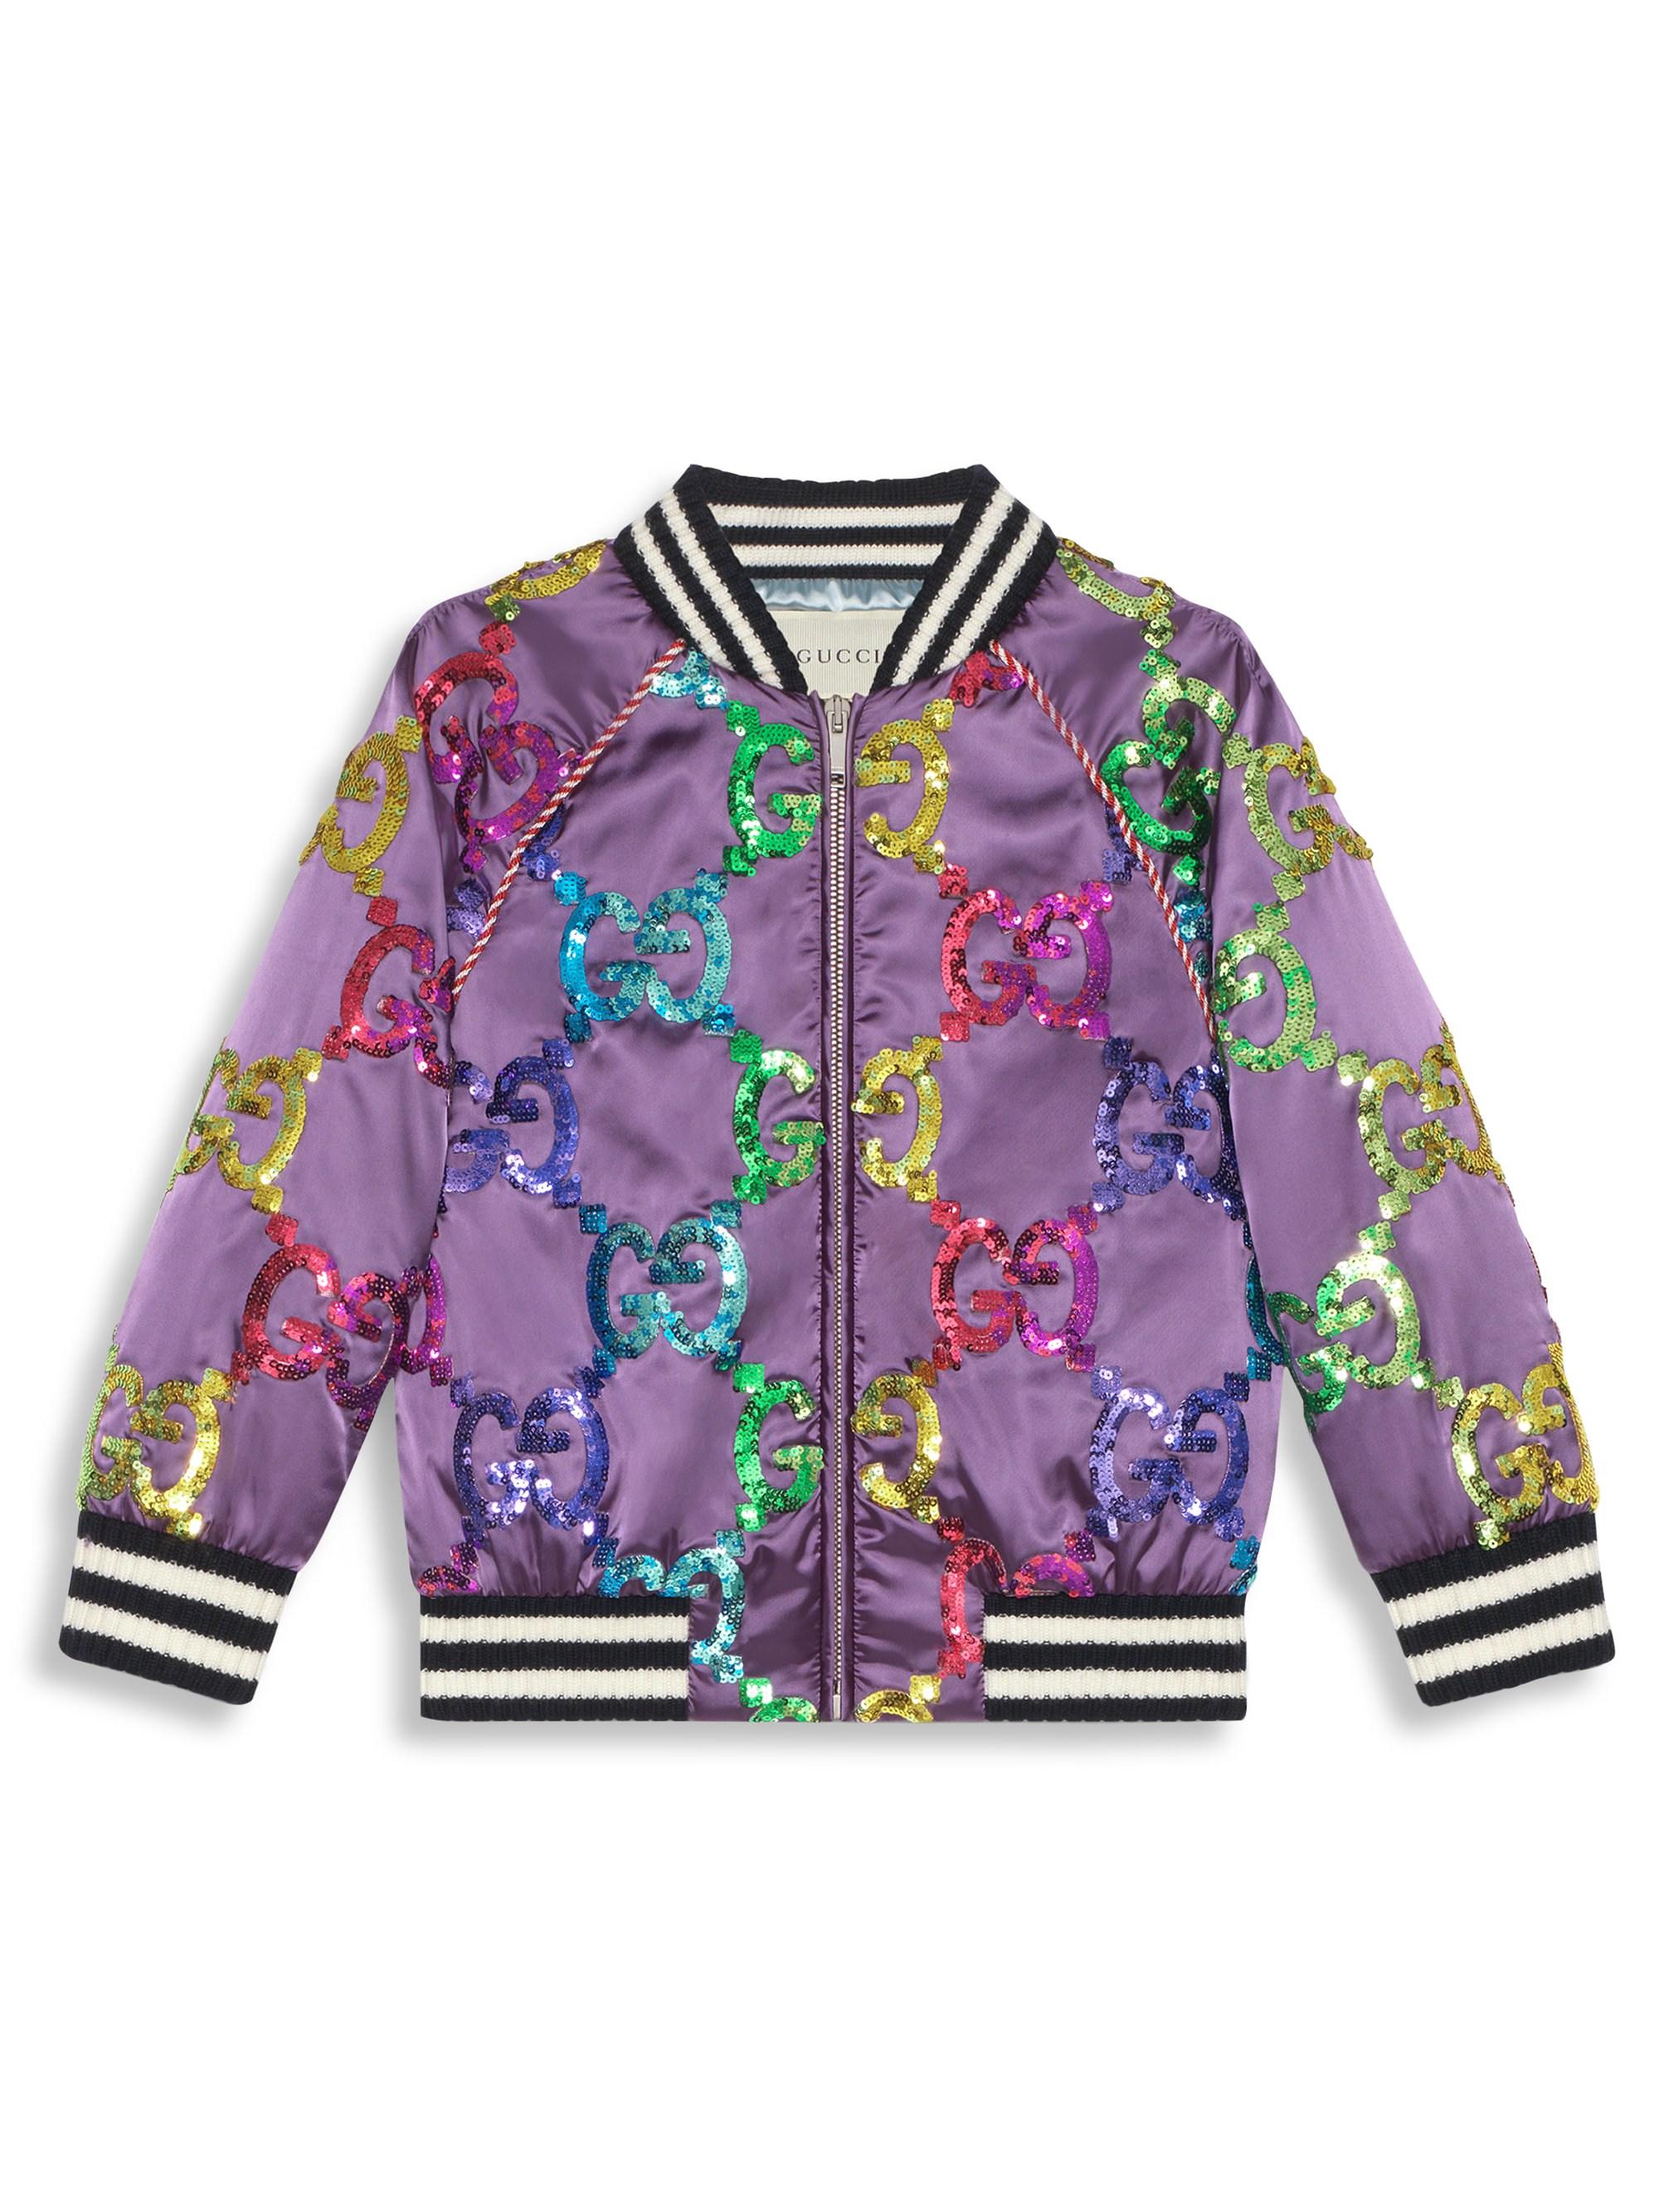 Gucci Girl's GG Sequin Embroidered Satin Bomber Jacket - Pink Multi | Lyst